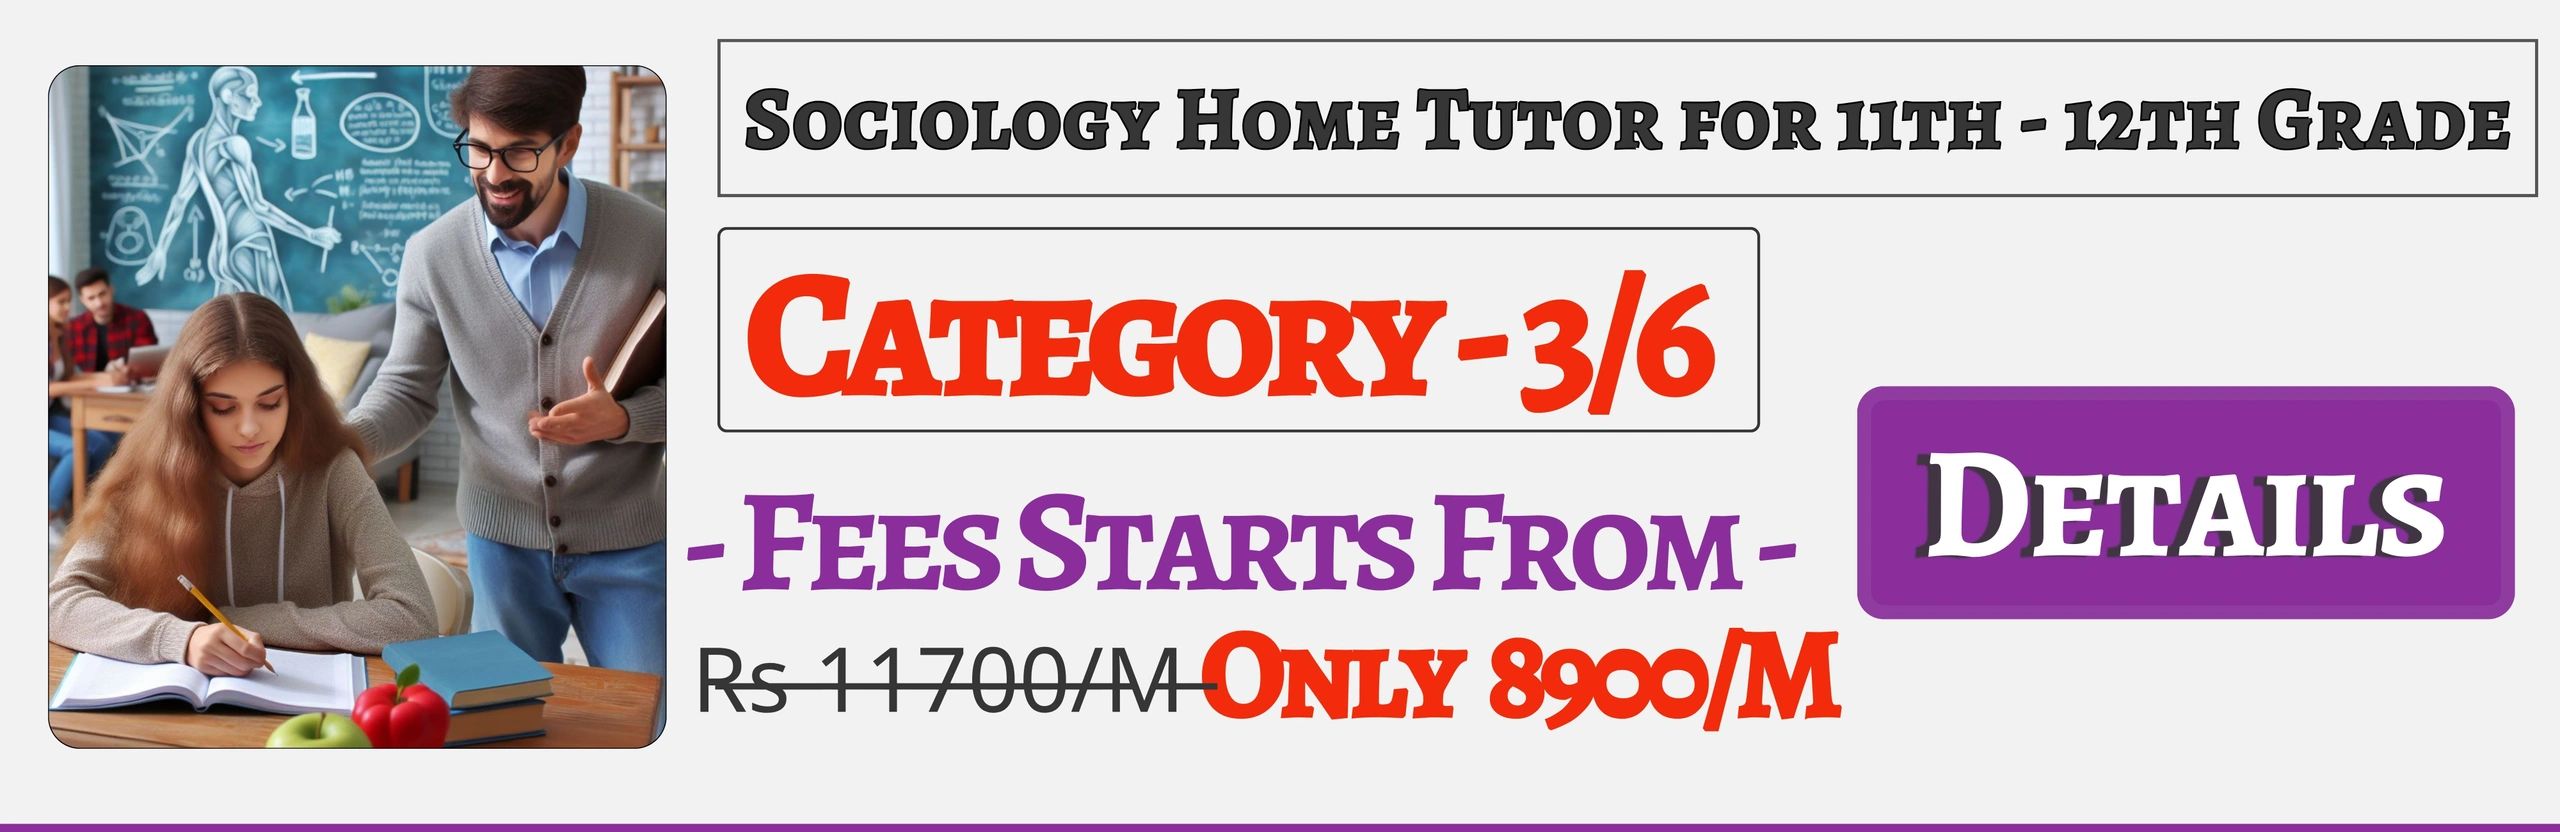 Book Best Nearby Sociology Home Tuition Tutors For 11th & 12th In Jaipur , Fees Only 8900/M